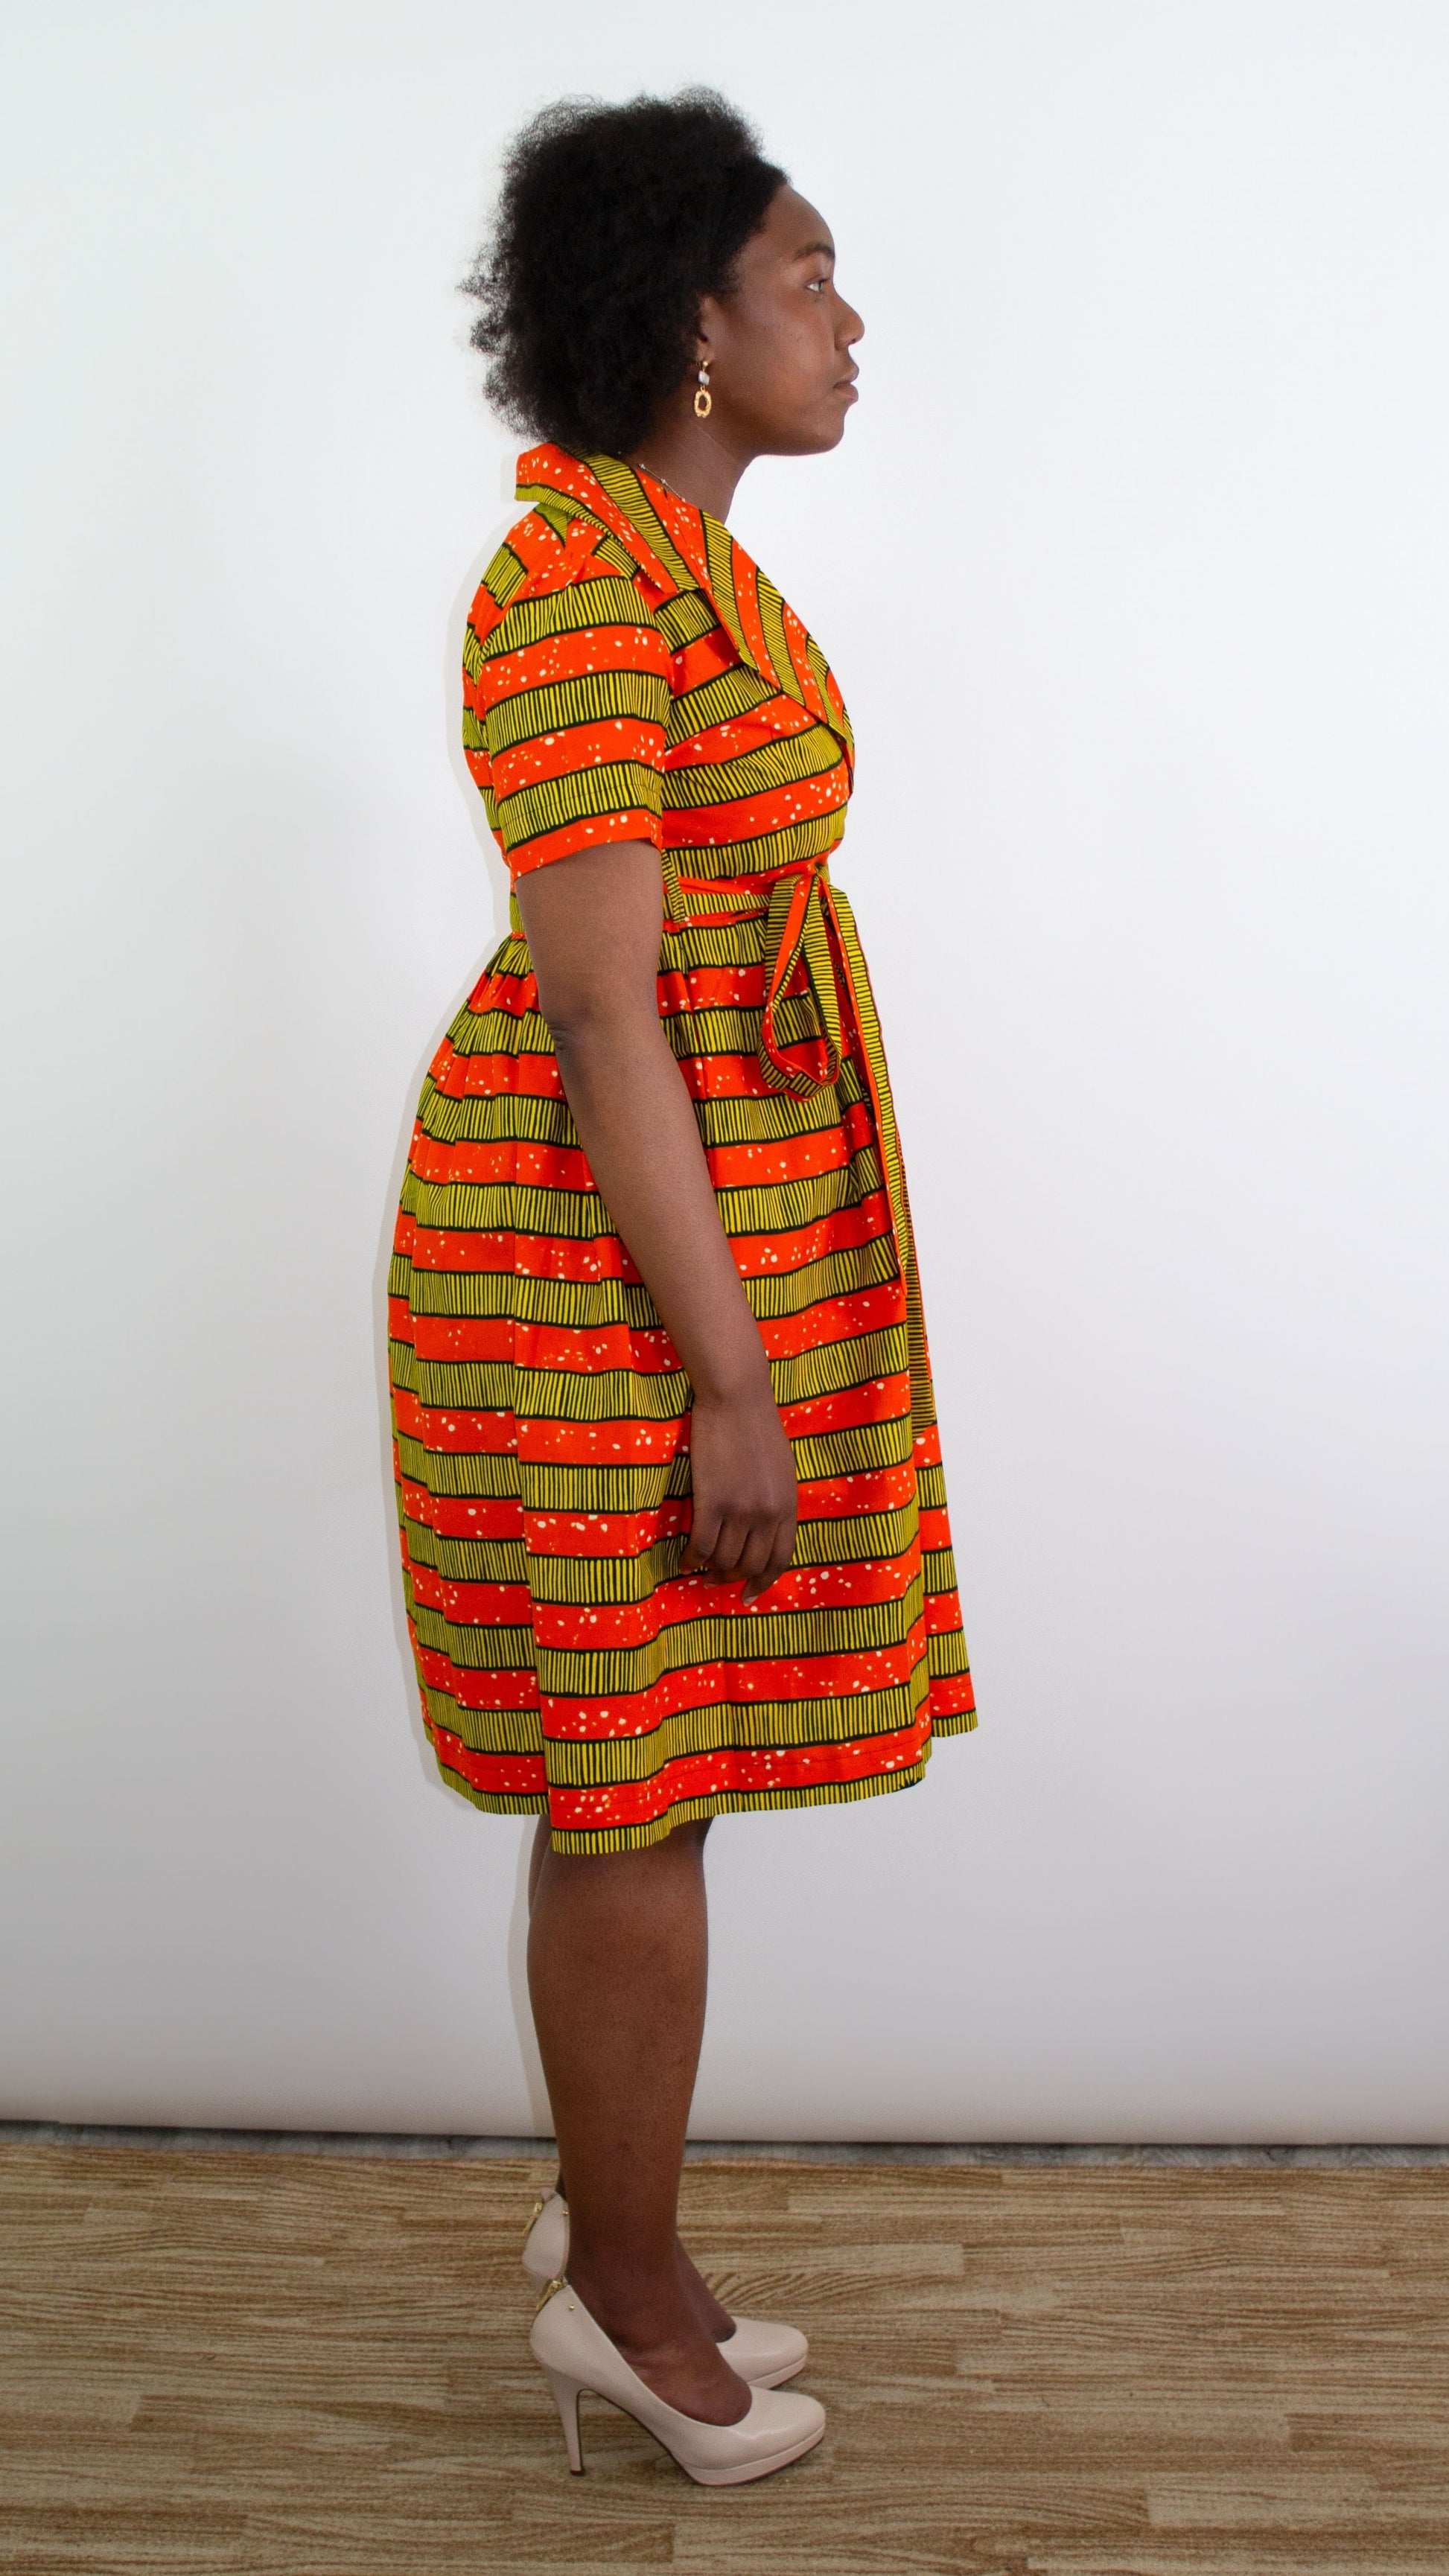 A model standing from the side reveals the tie bow belt of a short orange-yellow striped print dress.